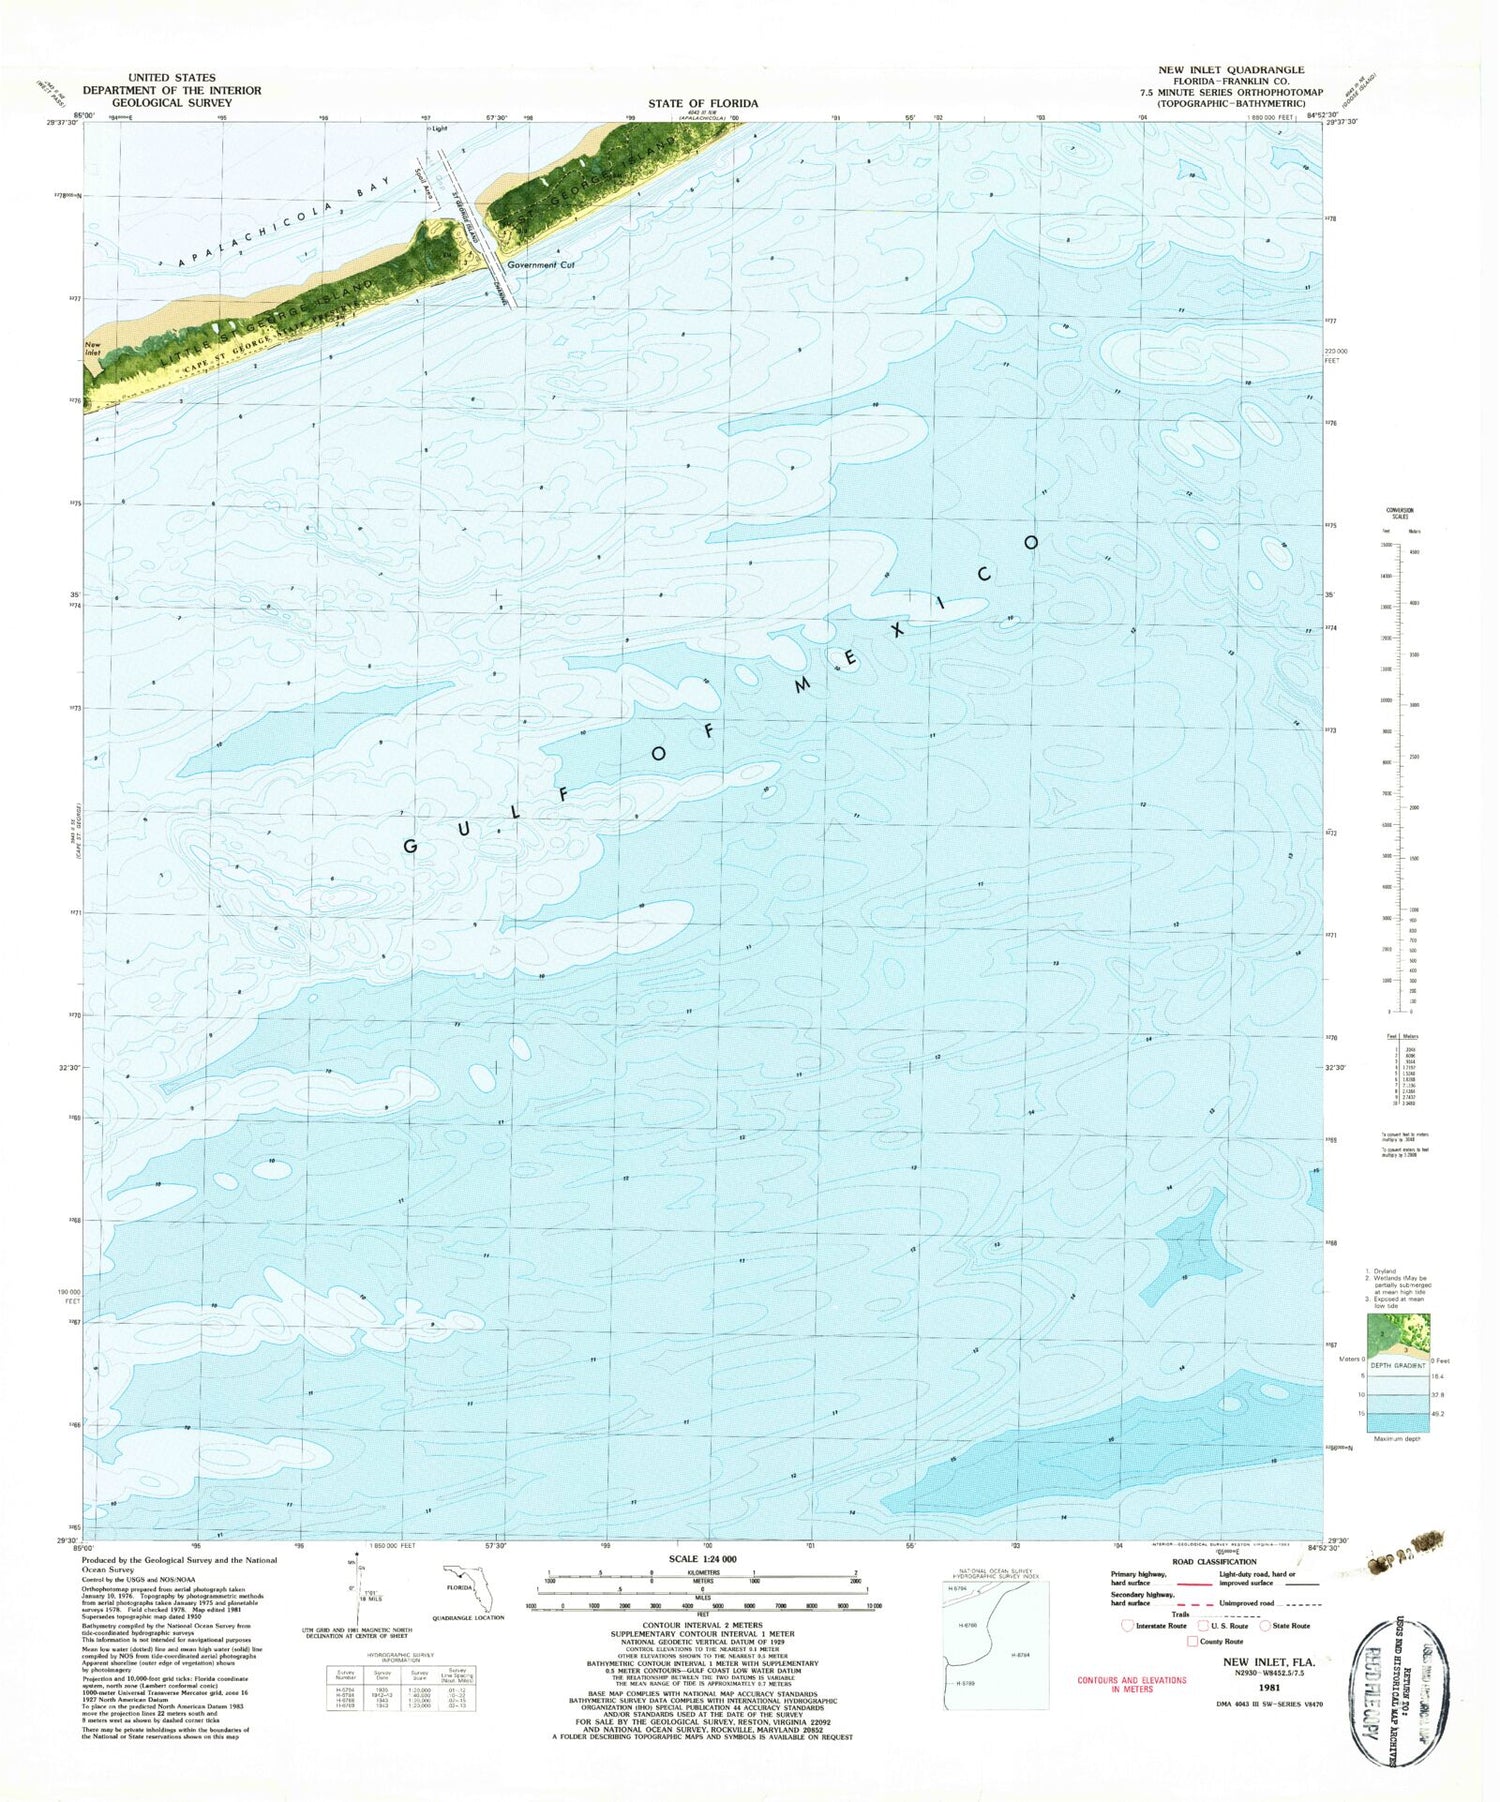 Classic USGS New Inlet Florida 7.5'x7.5' Topo Map Image